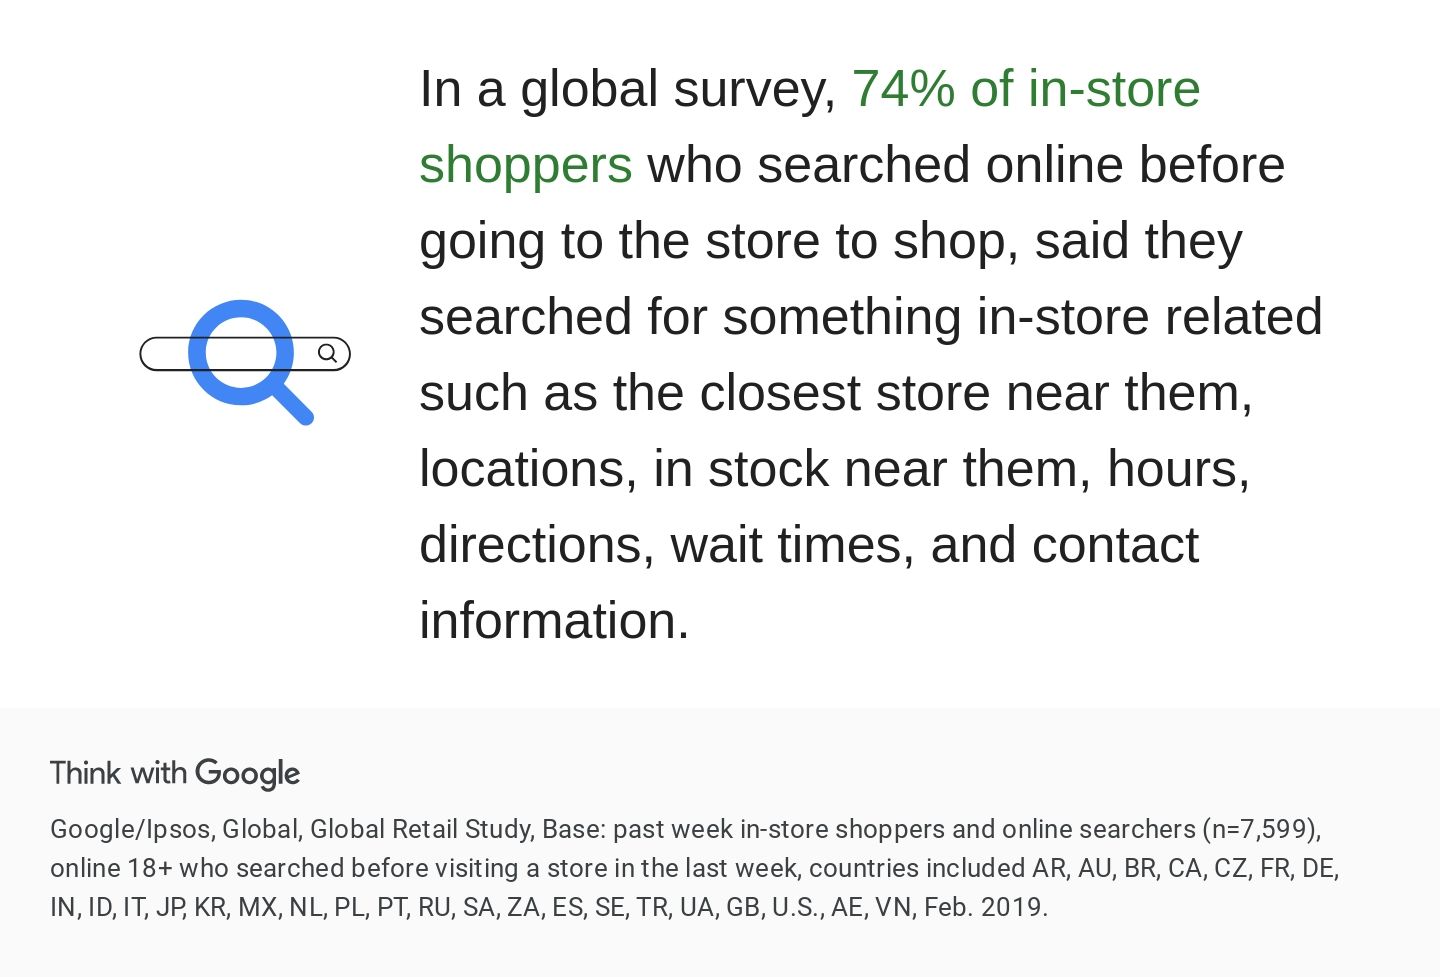 People search online before they do shopping.